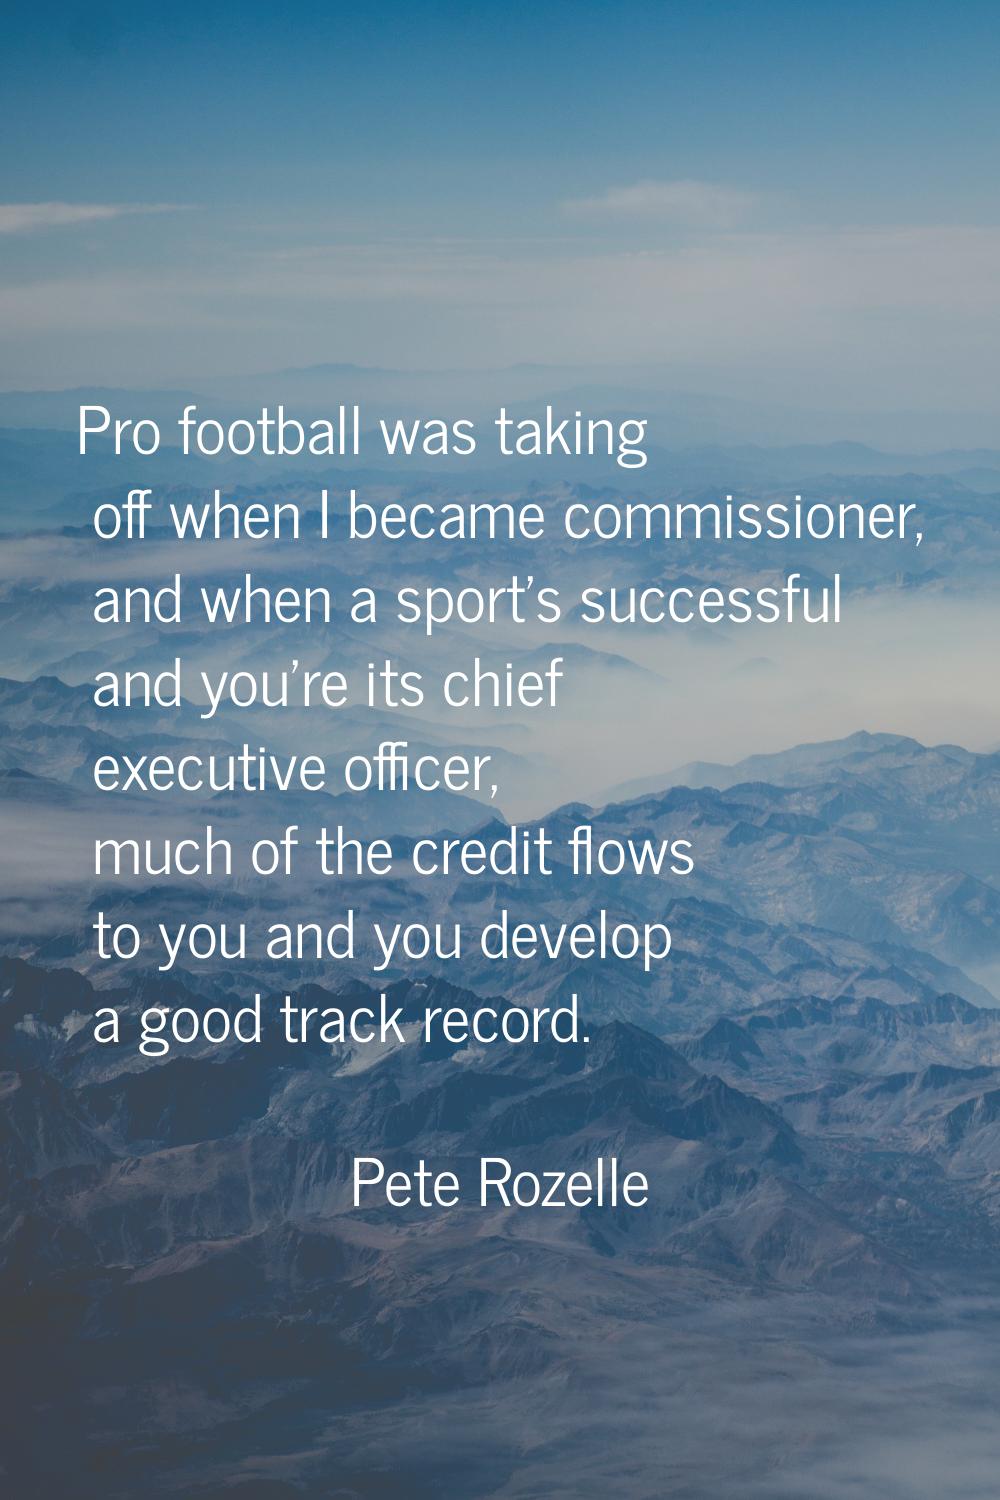 Pro football was taking off when I became commissioner, and when a sport's successful and you're it